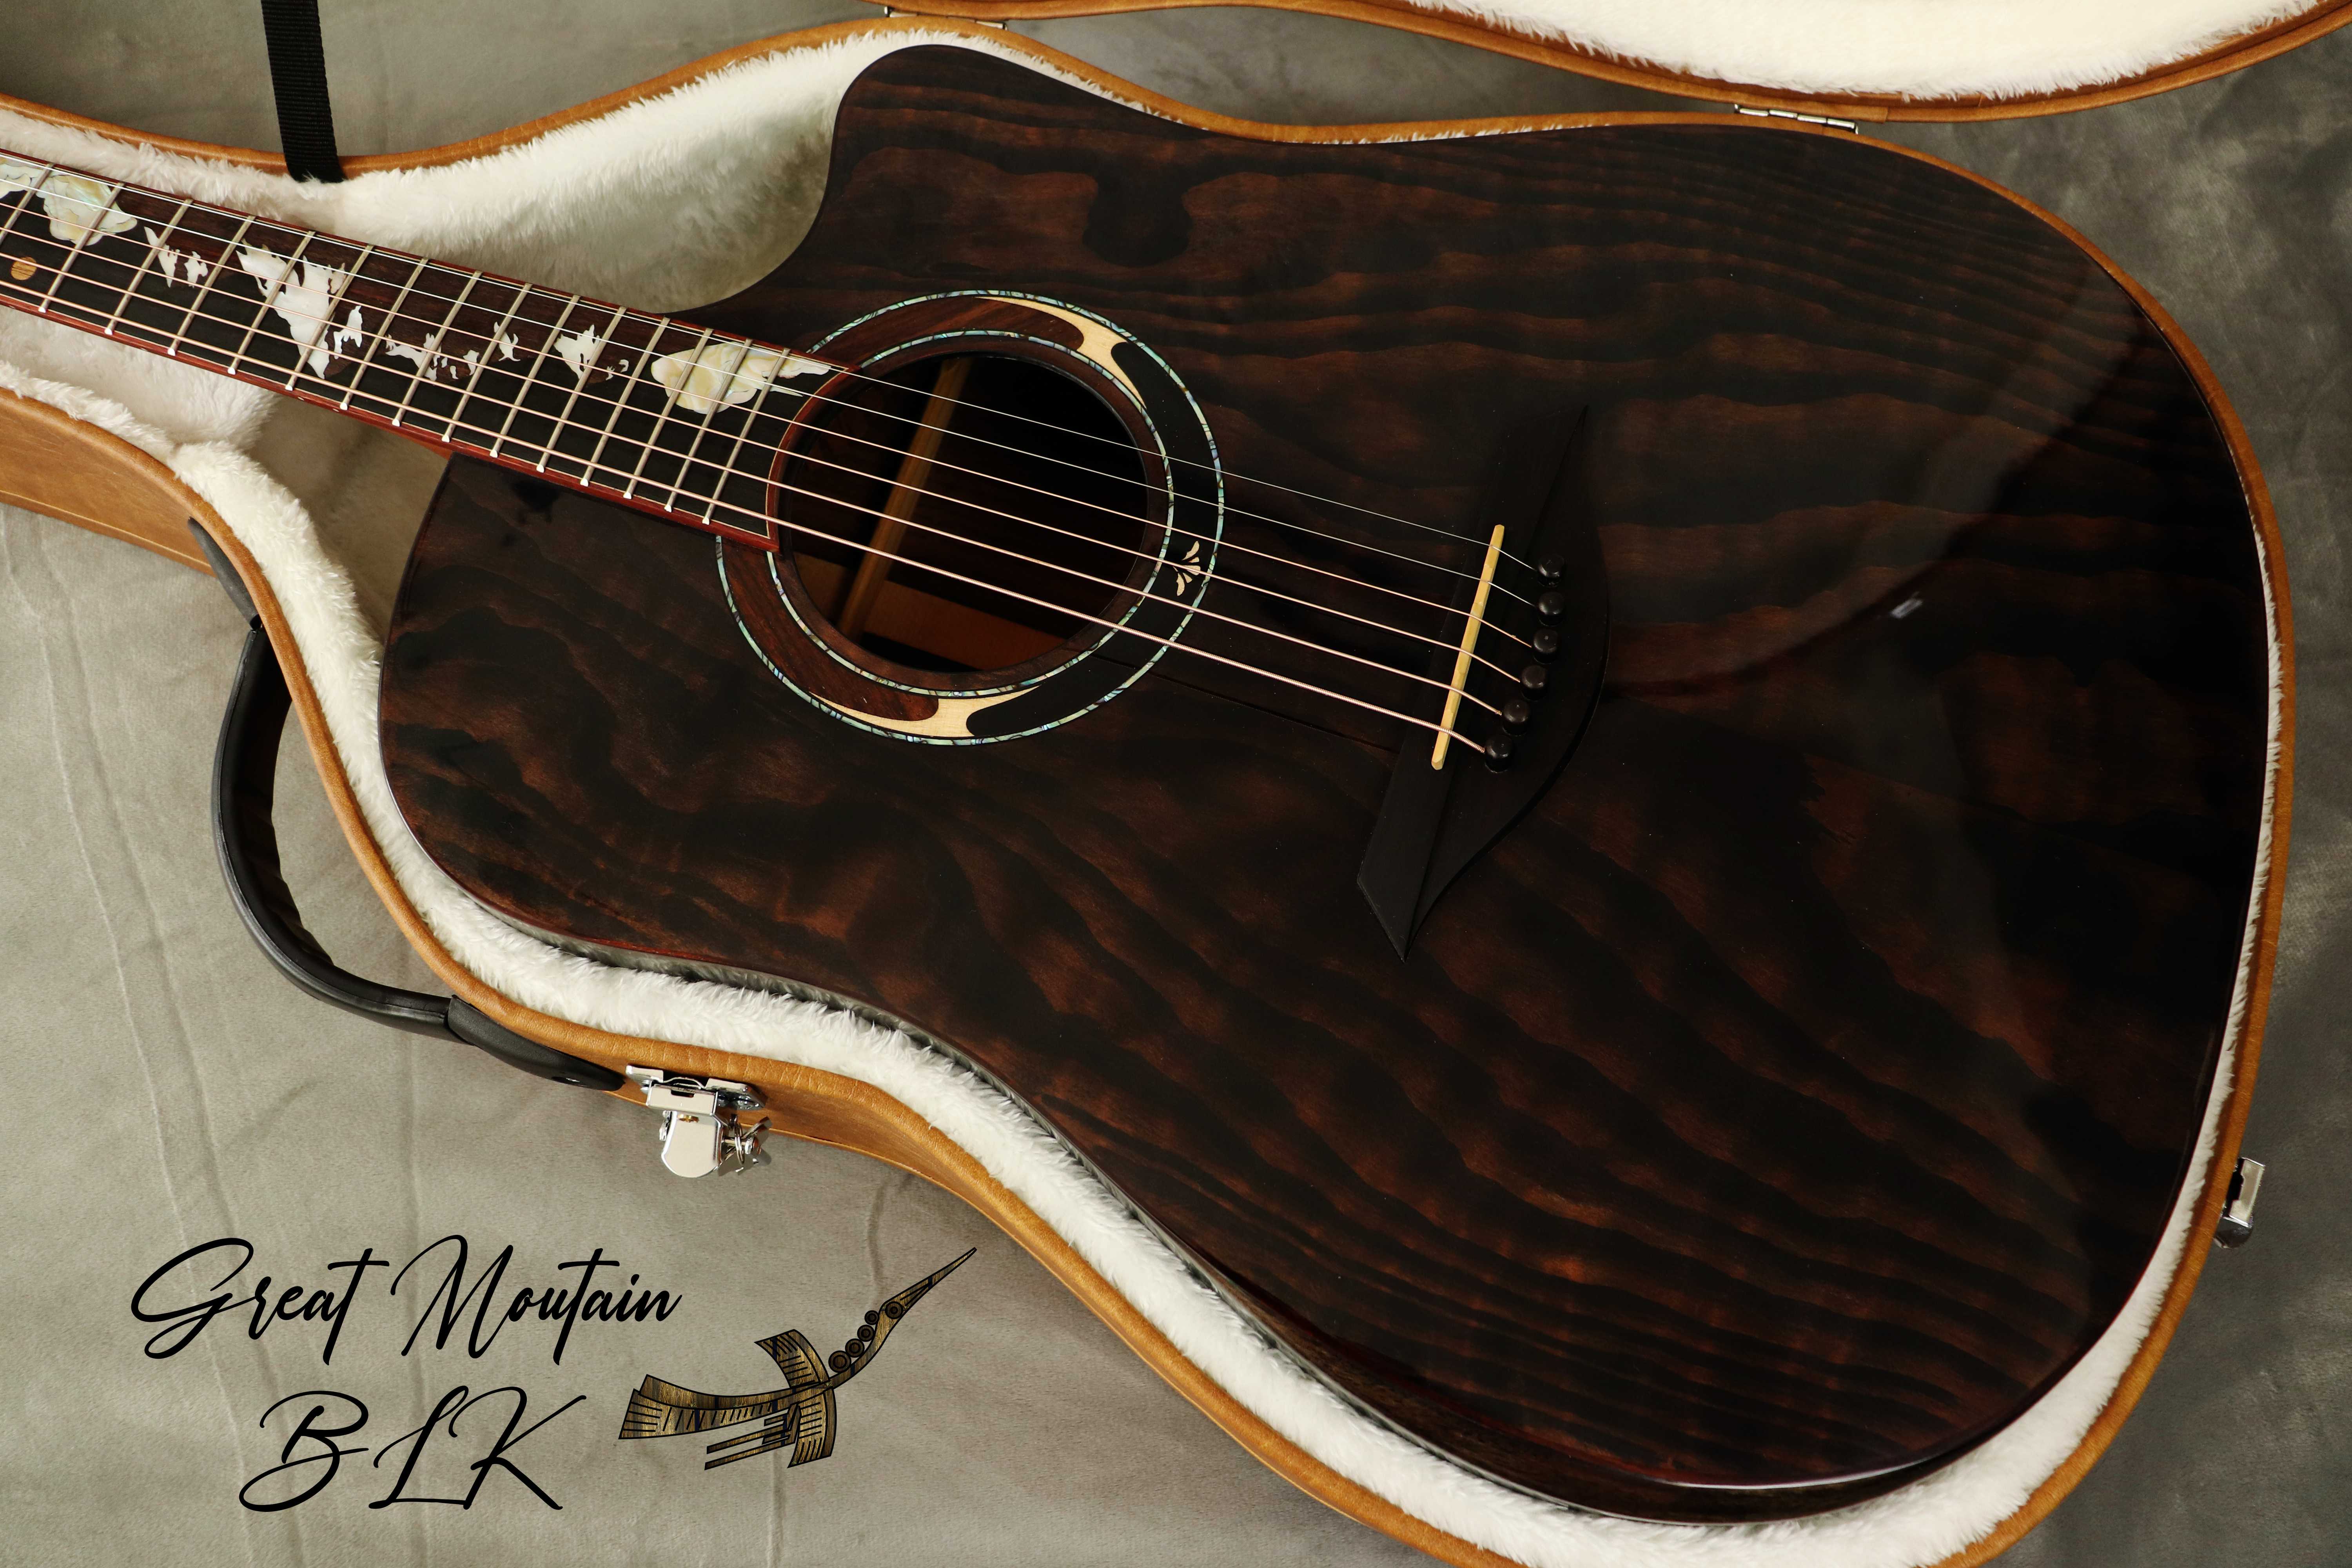 Great Moutain BLK (Redwood - Indian Rosewood)